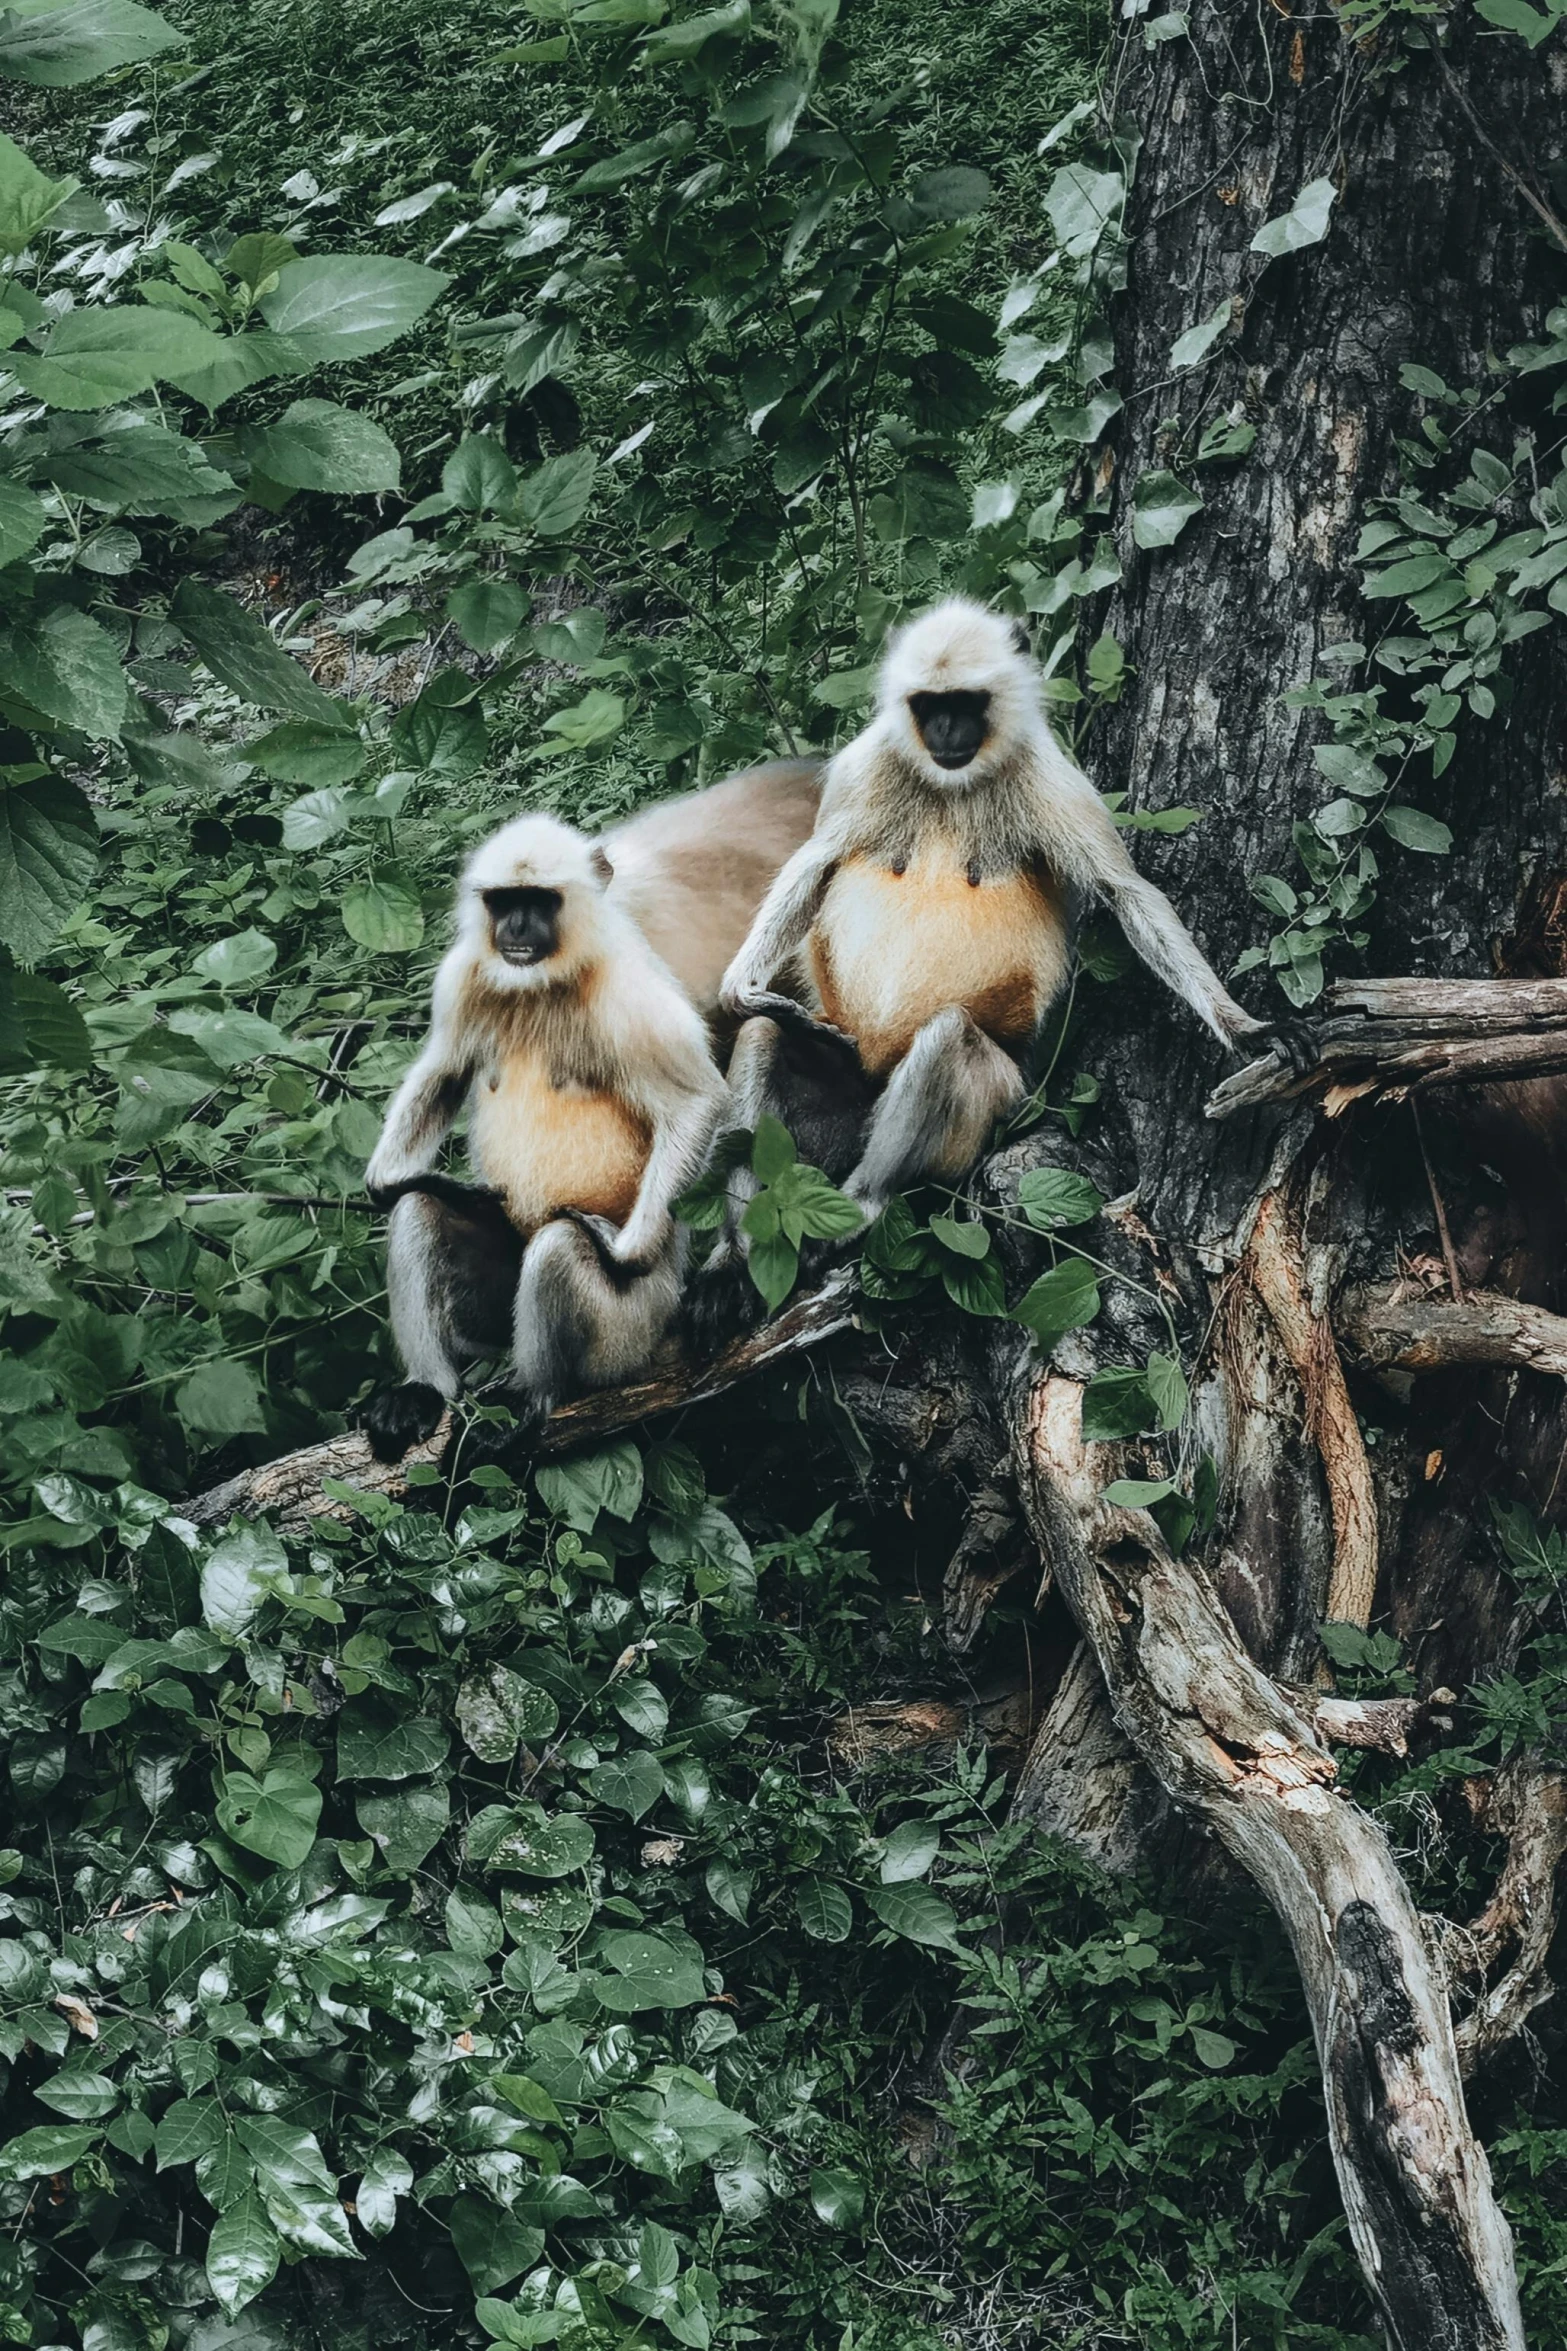 the monkeys are sitting on trees with green leaves